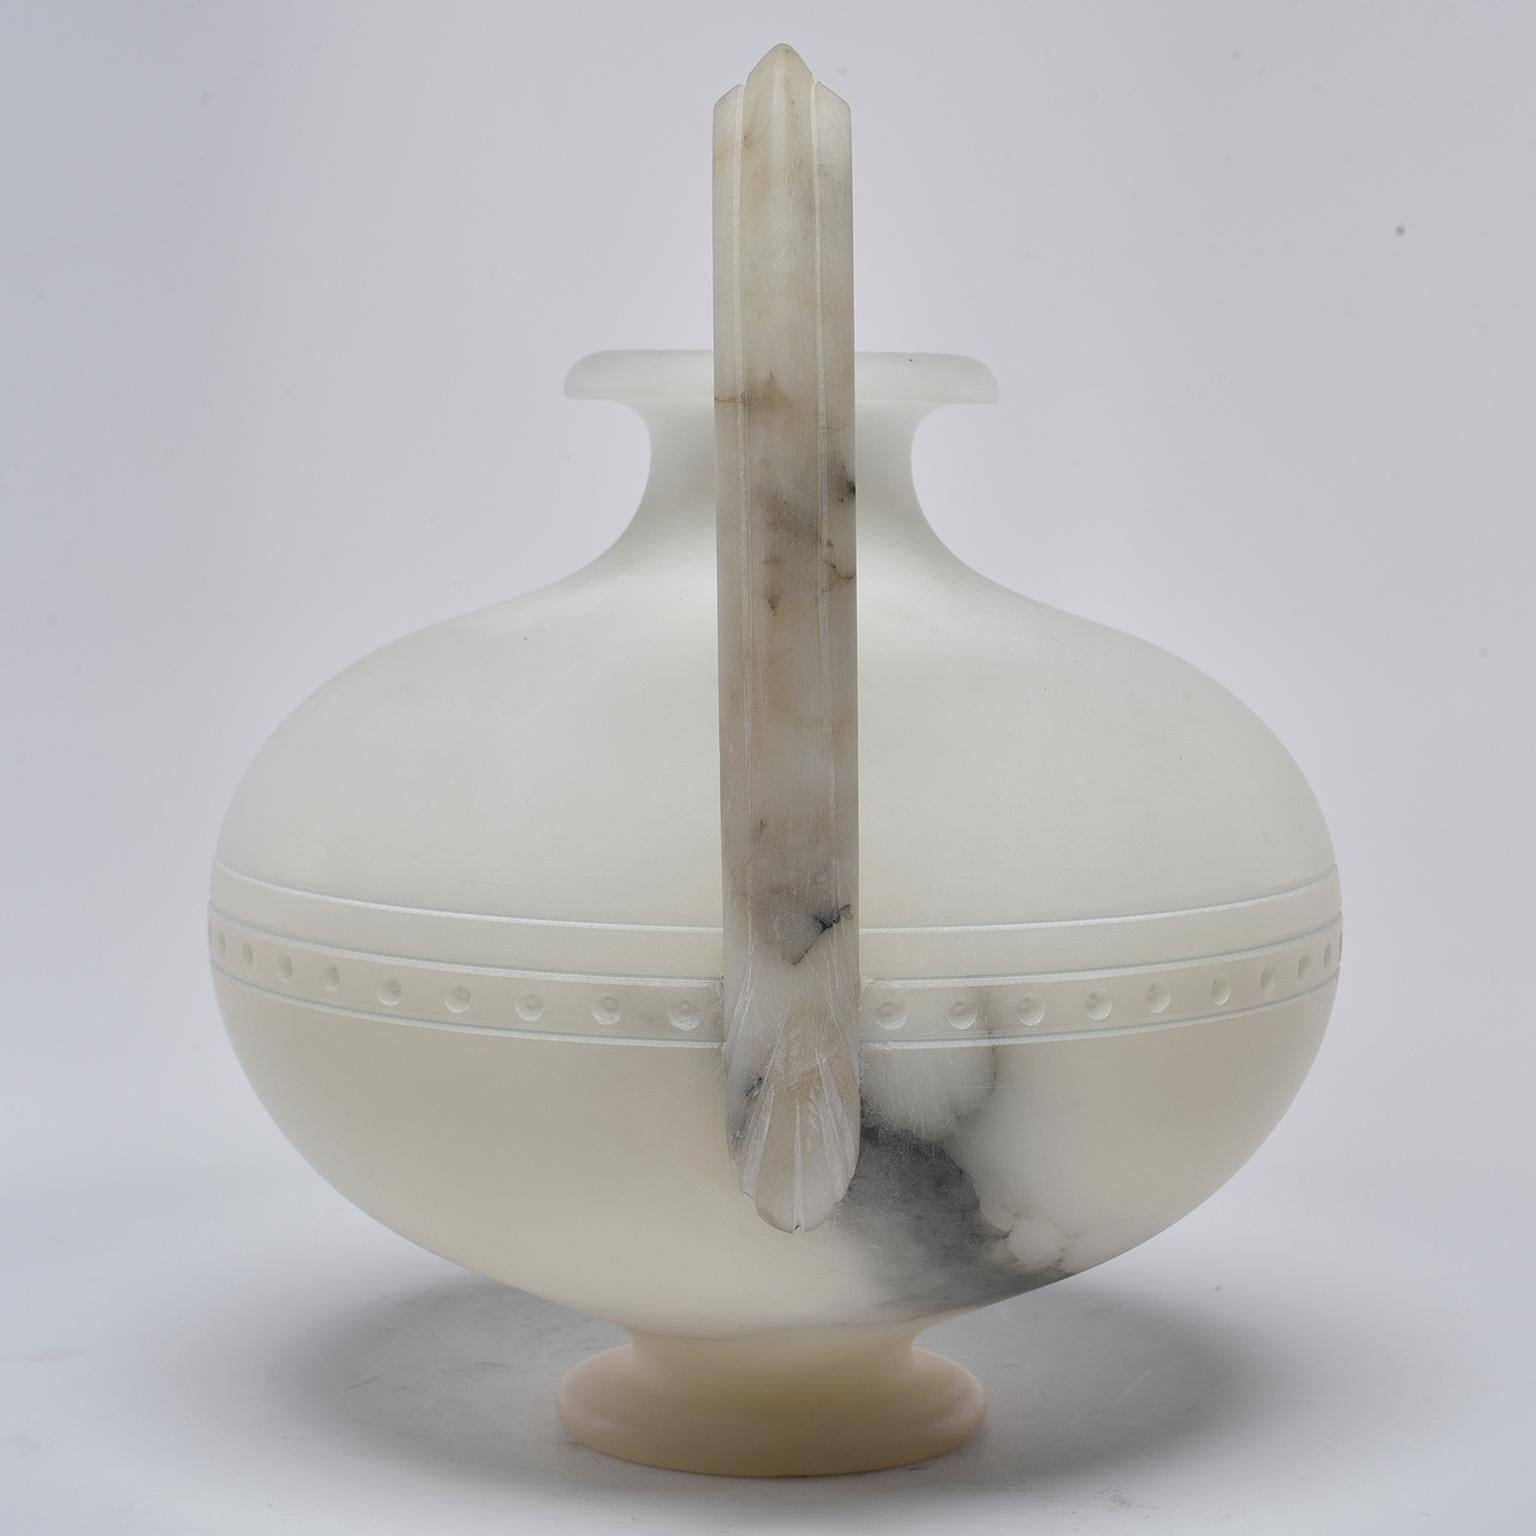 New, hand carved white alabaster vessel made for us by Italian craftsmen features globe shaped body with tall, dramatic handles.